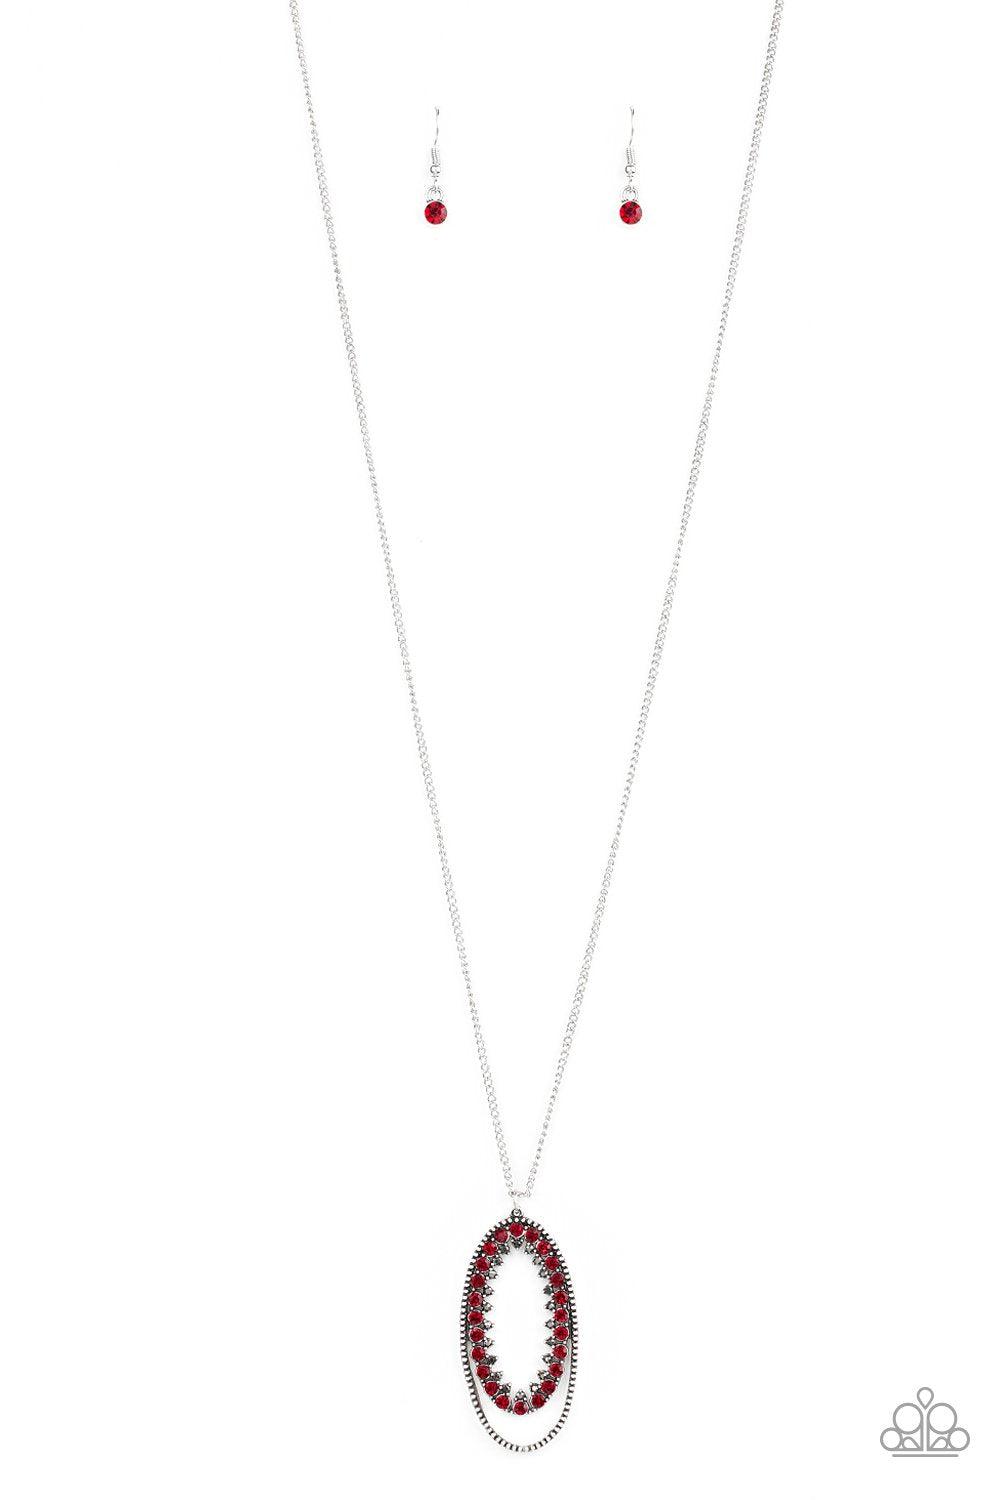 Money Mood Red and Hematite Rhinestone Necklace - Paparazzi Accessories-CarasShop.com - $5 Jewelry by Cara Jewels